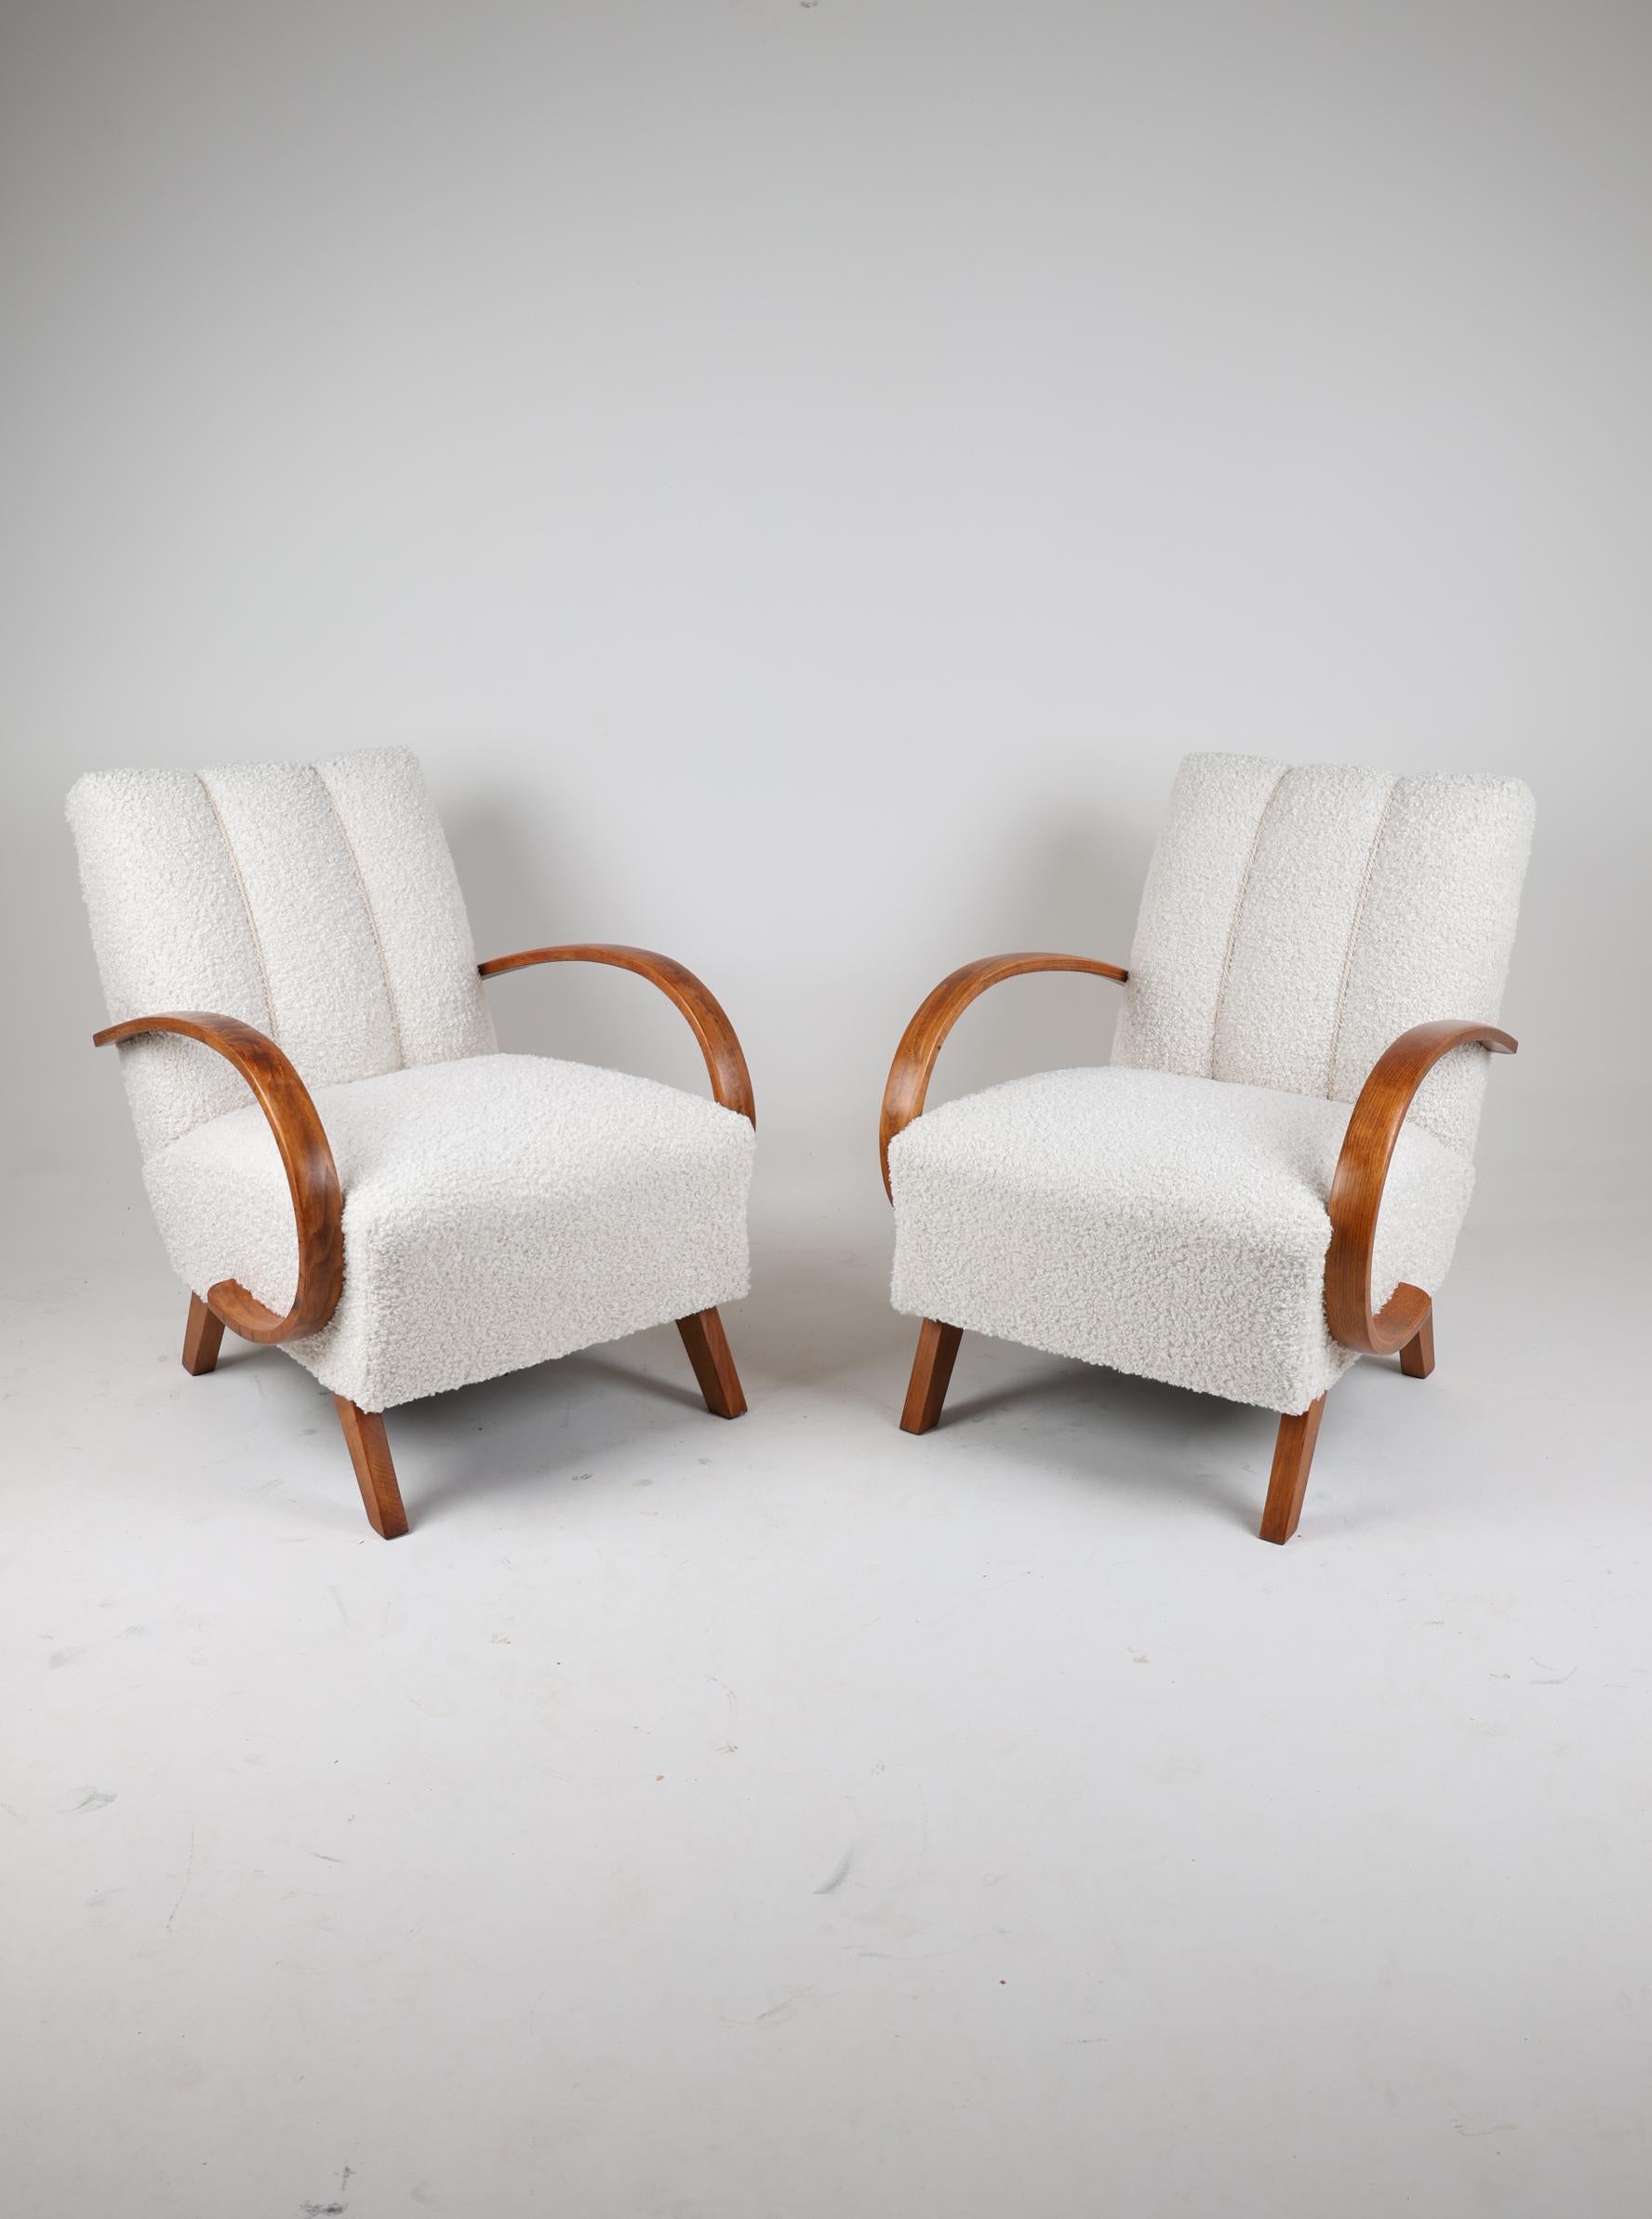 A pair of Armchairs H-410 by Jindrich Halabala 
Czech Republic,  1950

A pair of armchairs by Czech furniture designer J. Halabala.
An armchair with perfect proportions and a timeless form. The main character is the H 410 model by Jendrich Halabali,